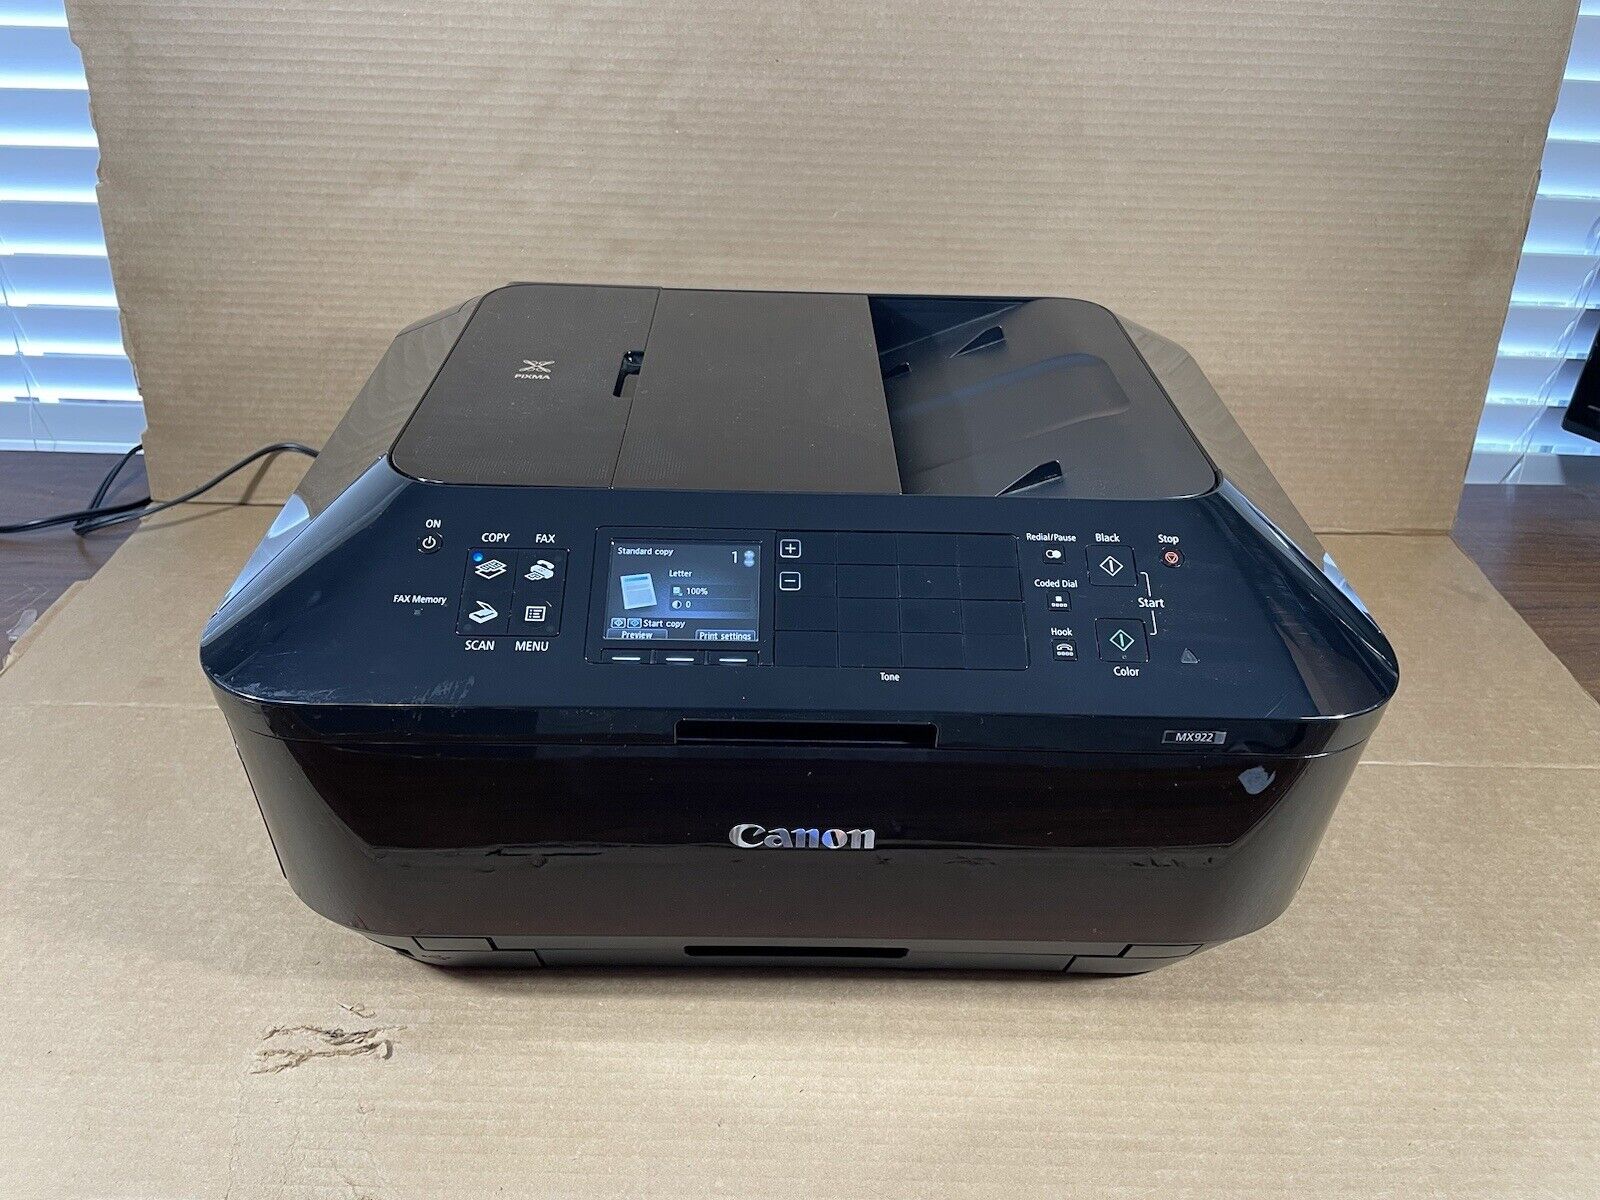 Canon PIXMA MX922 Wireless Office All-in-One Printer - Tested w/ Ink